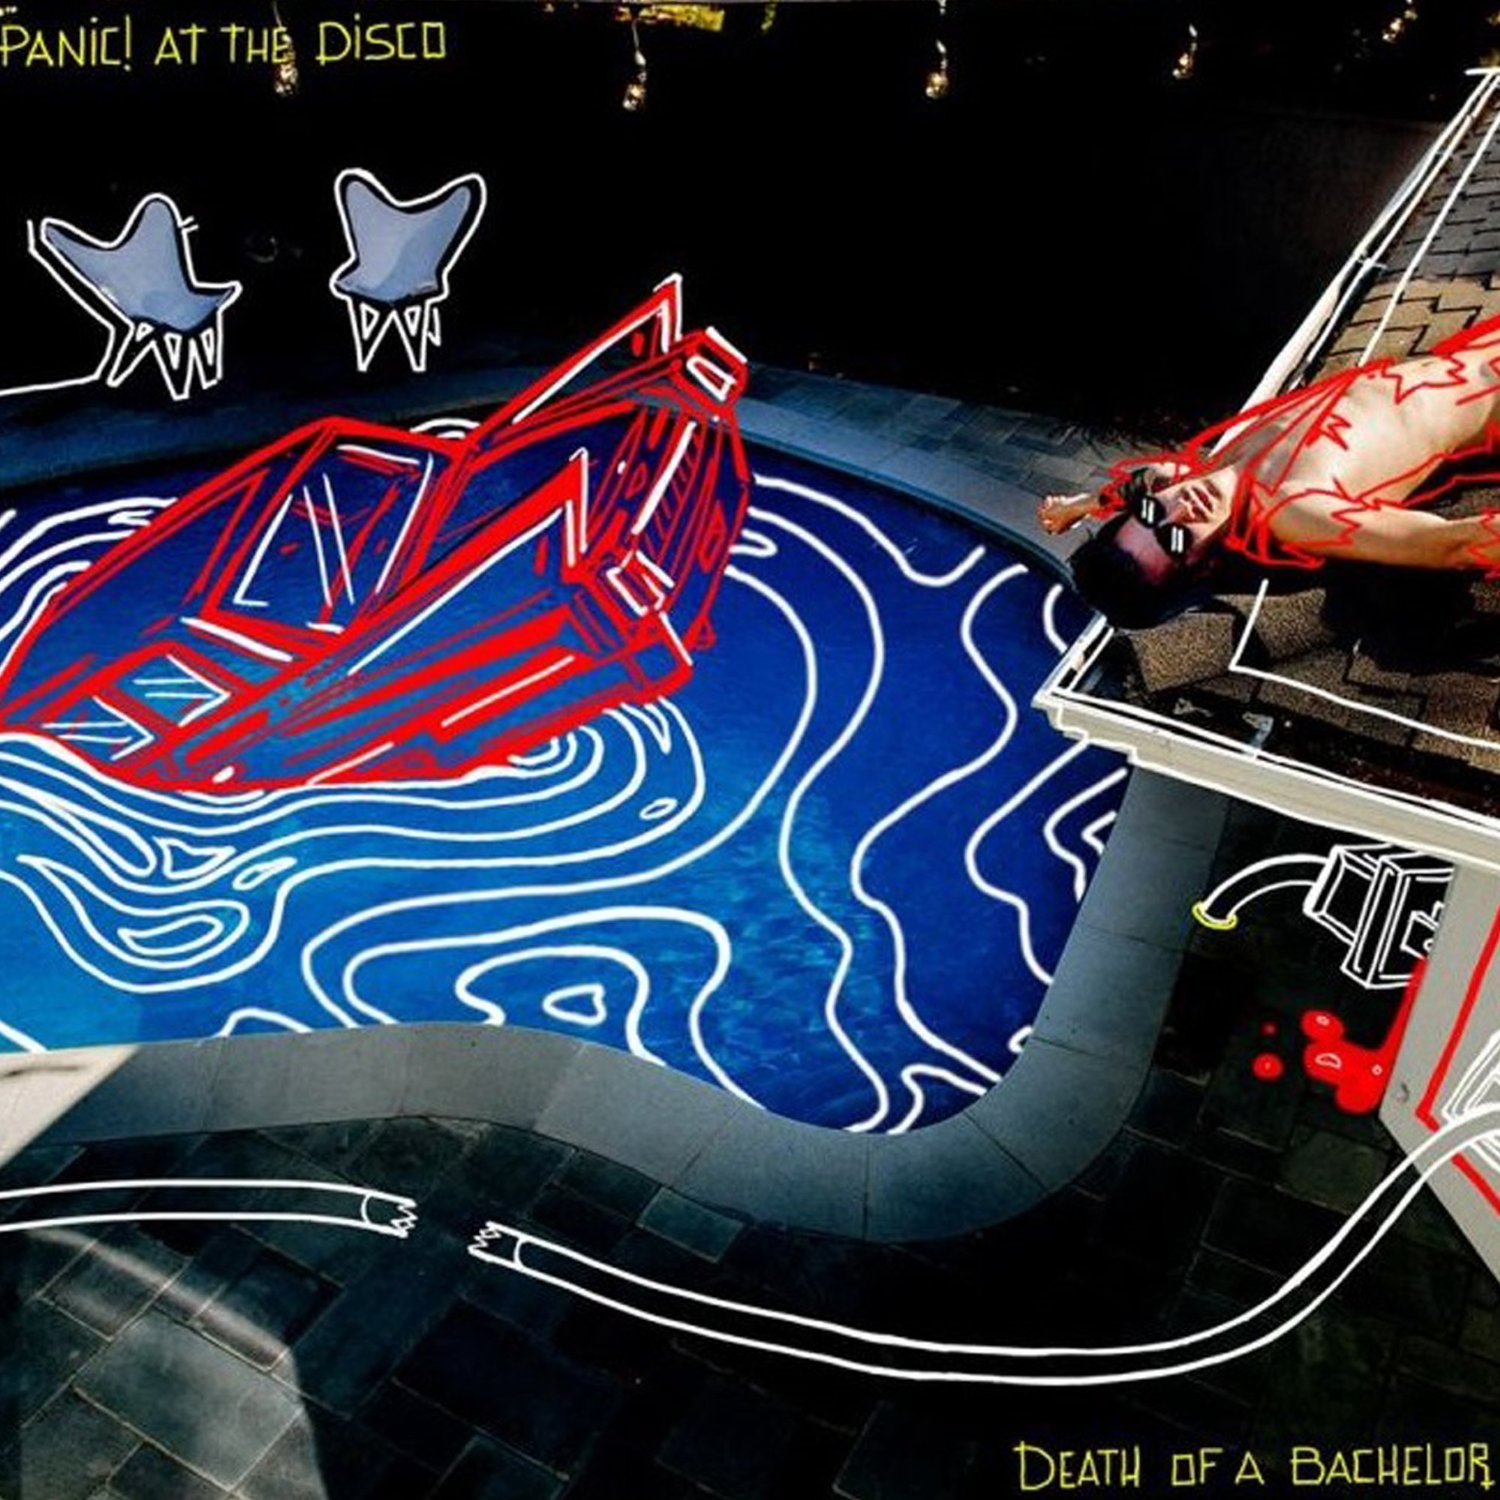 Panic At The Disco – Death Of A Bachelor (2016) [HDTracks FLAC 24bit/96kHz]